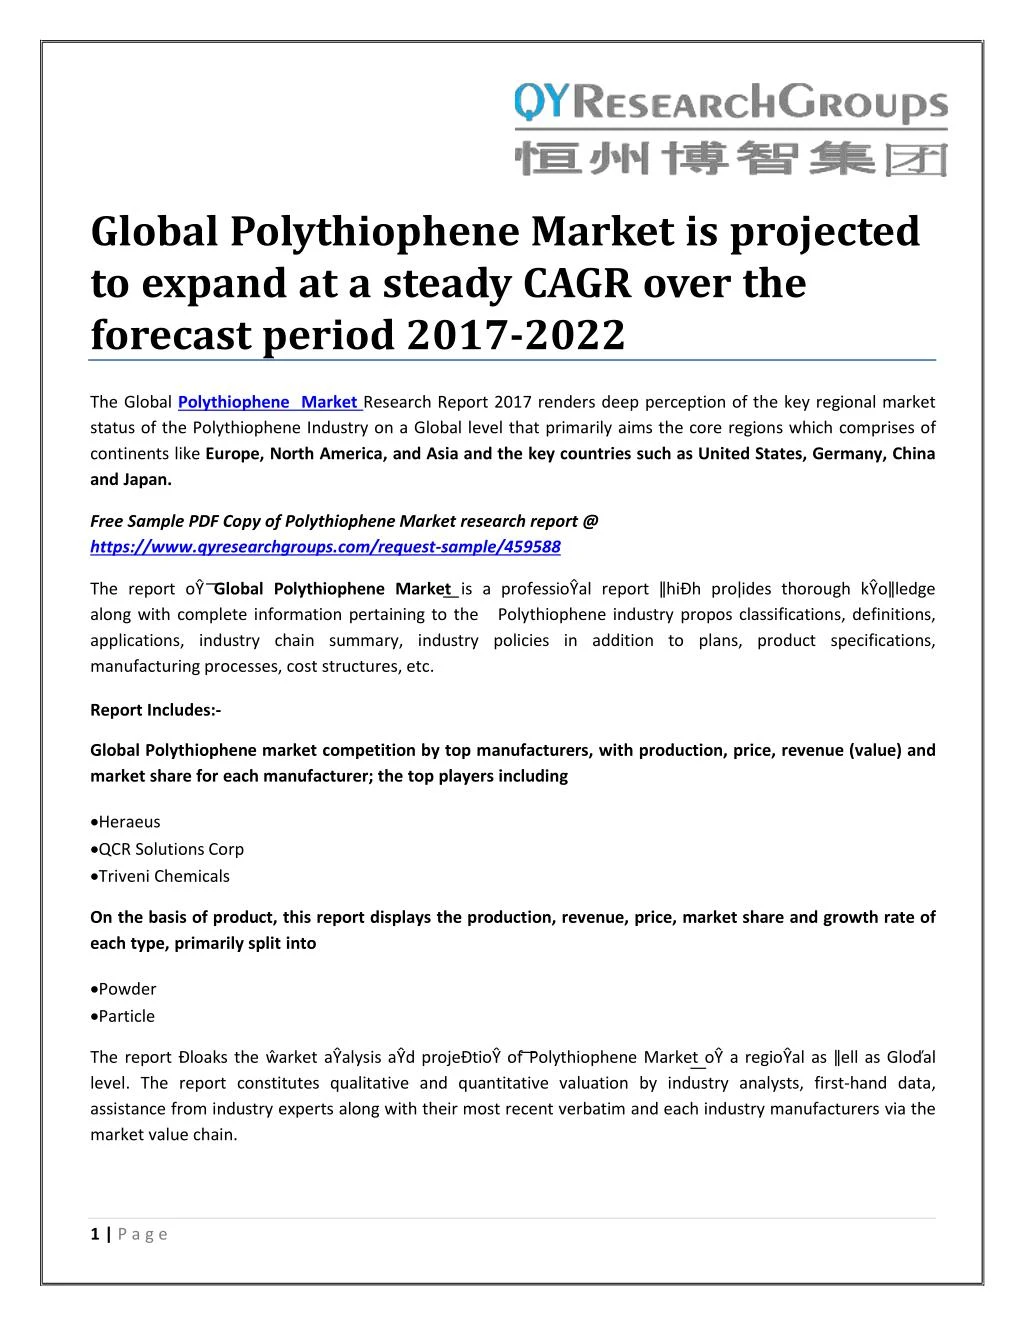 global polythiophene market is projected